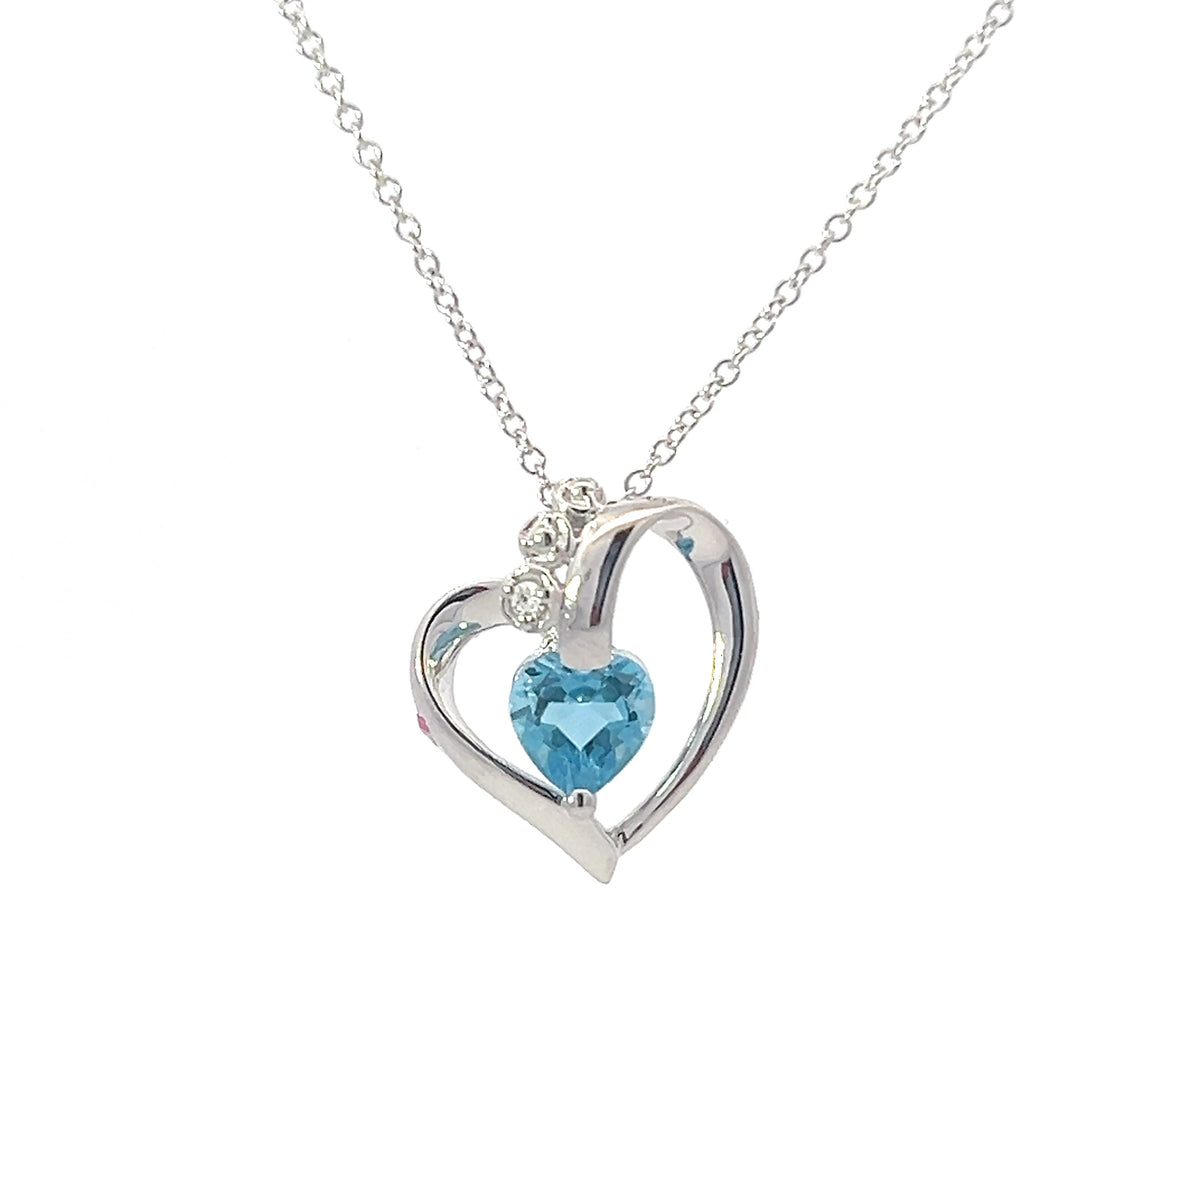 10K White Gold Blue Topaz and 0.005cttw Diamond Heart Necklace - 18 Inches